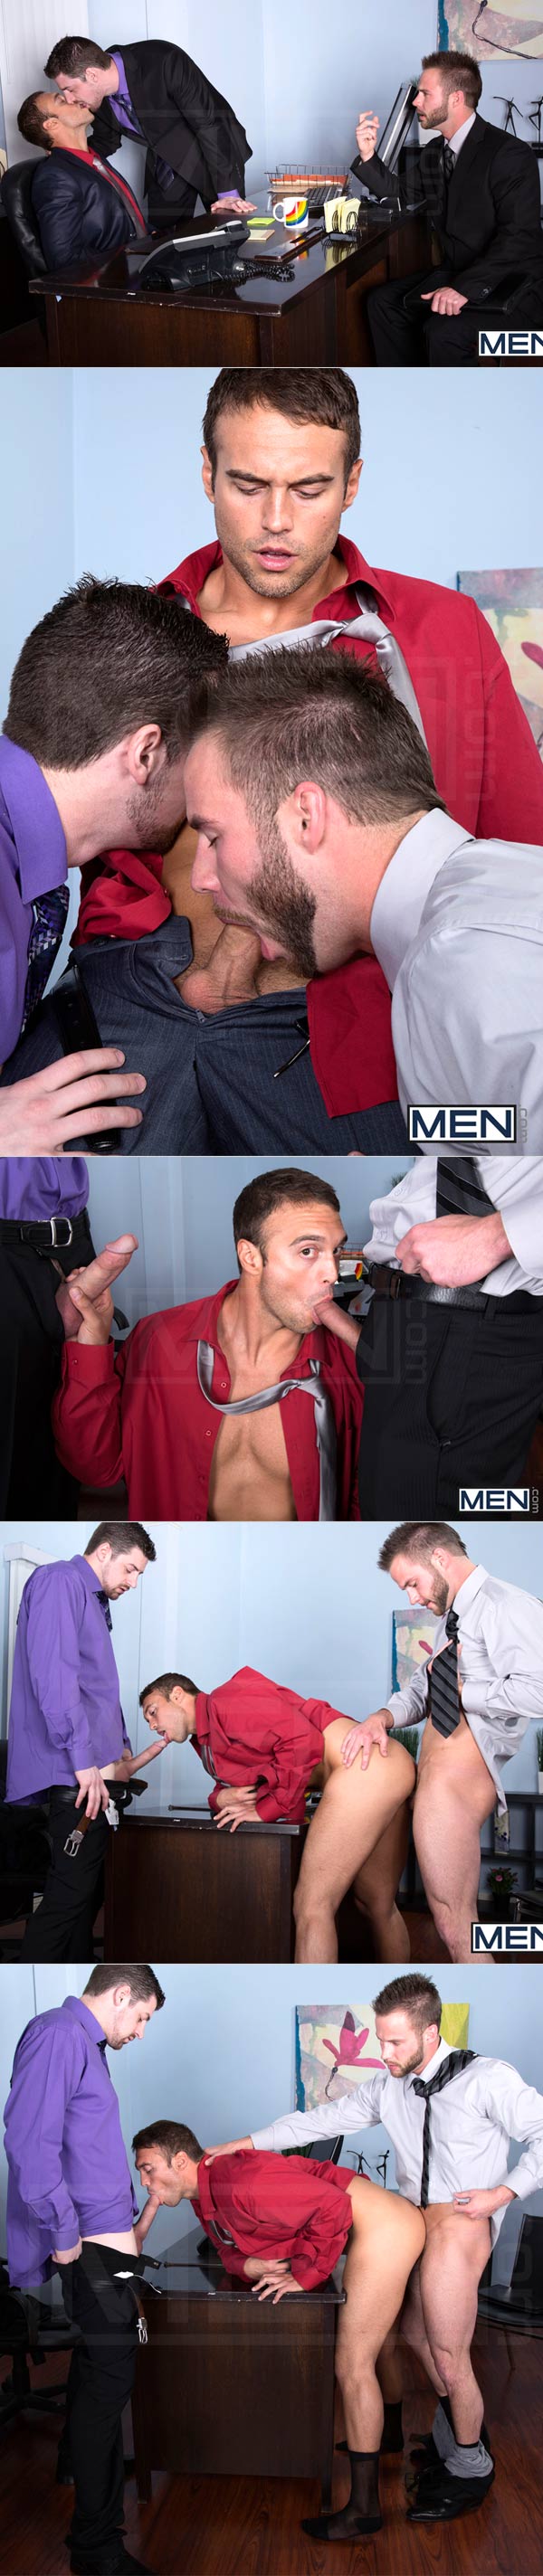 The Sales Call (Rocco Reed, Chris Bines & Andrew Stark) at The Gay Office